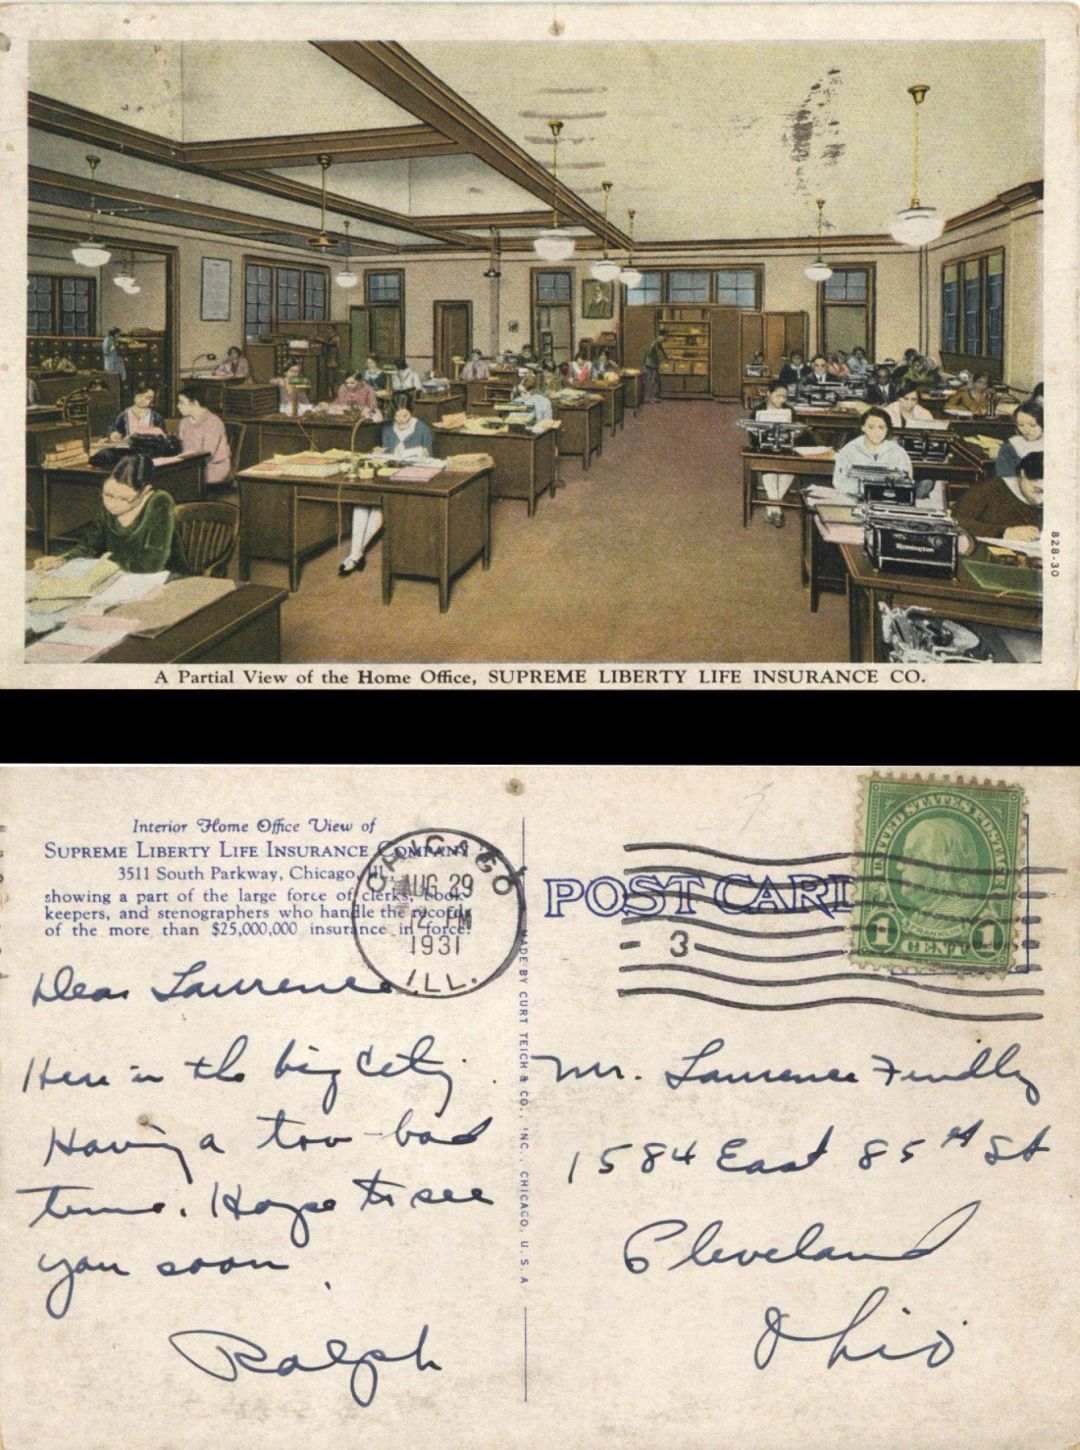 Post Card for Supreme Liberty Life Insurance Co. - 1931 dated Insurance